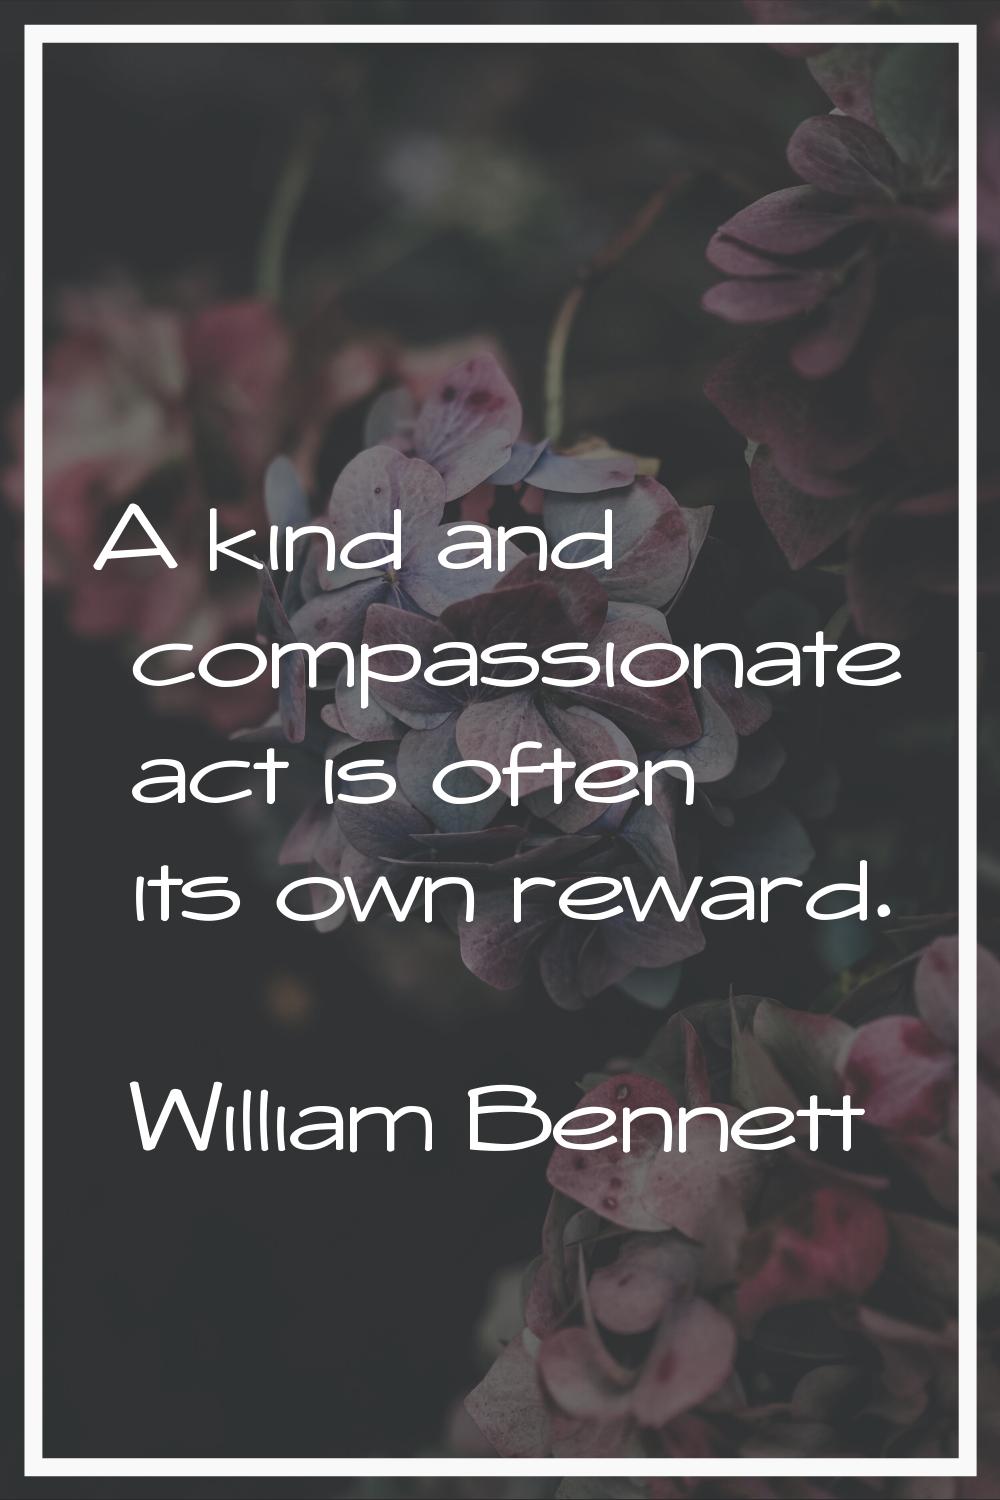 A kind and compassionate act is often its own reward.